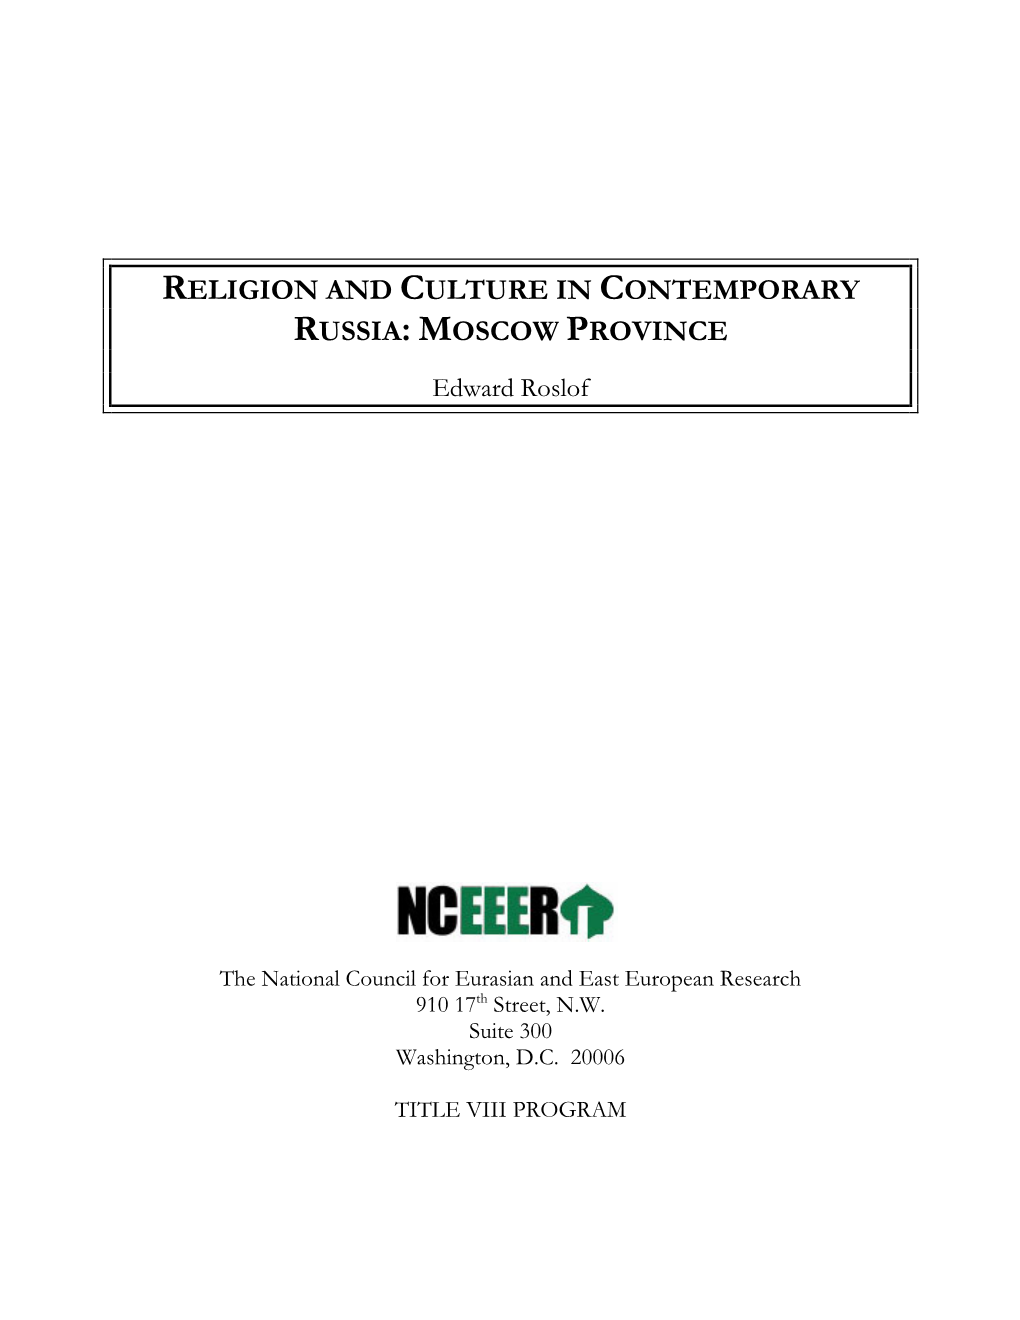 Religion and Culture in Contemporary Russia: Moscow Province